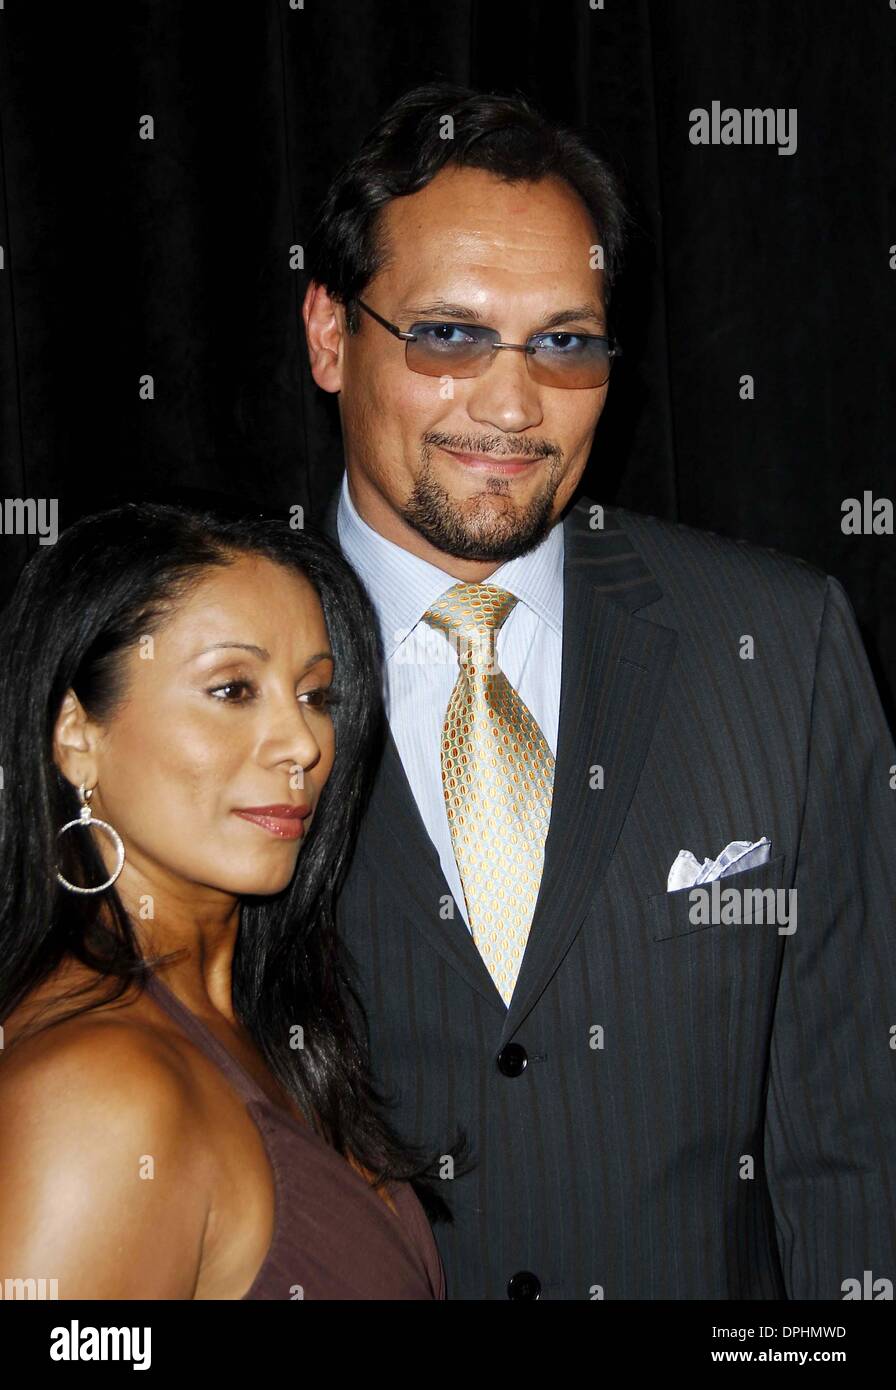 Aug. 18, 2006 - Hollywood, California, U.S. - K49339MGE.BEVERLY HILLS, CA AUGUST 18, 2006 (SSI) - -.Wanda De Jesus and actor Jimmy Smits during the 21st Annual Imagen Awards Gala, held at the Beverly Hilton Hotel, on August 18, 2006, in Beverly Hills, California.(Credit Image: © Michael Germana/Globe Photos/ZUMAPRESS.com) Stock Photo